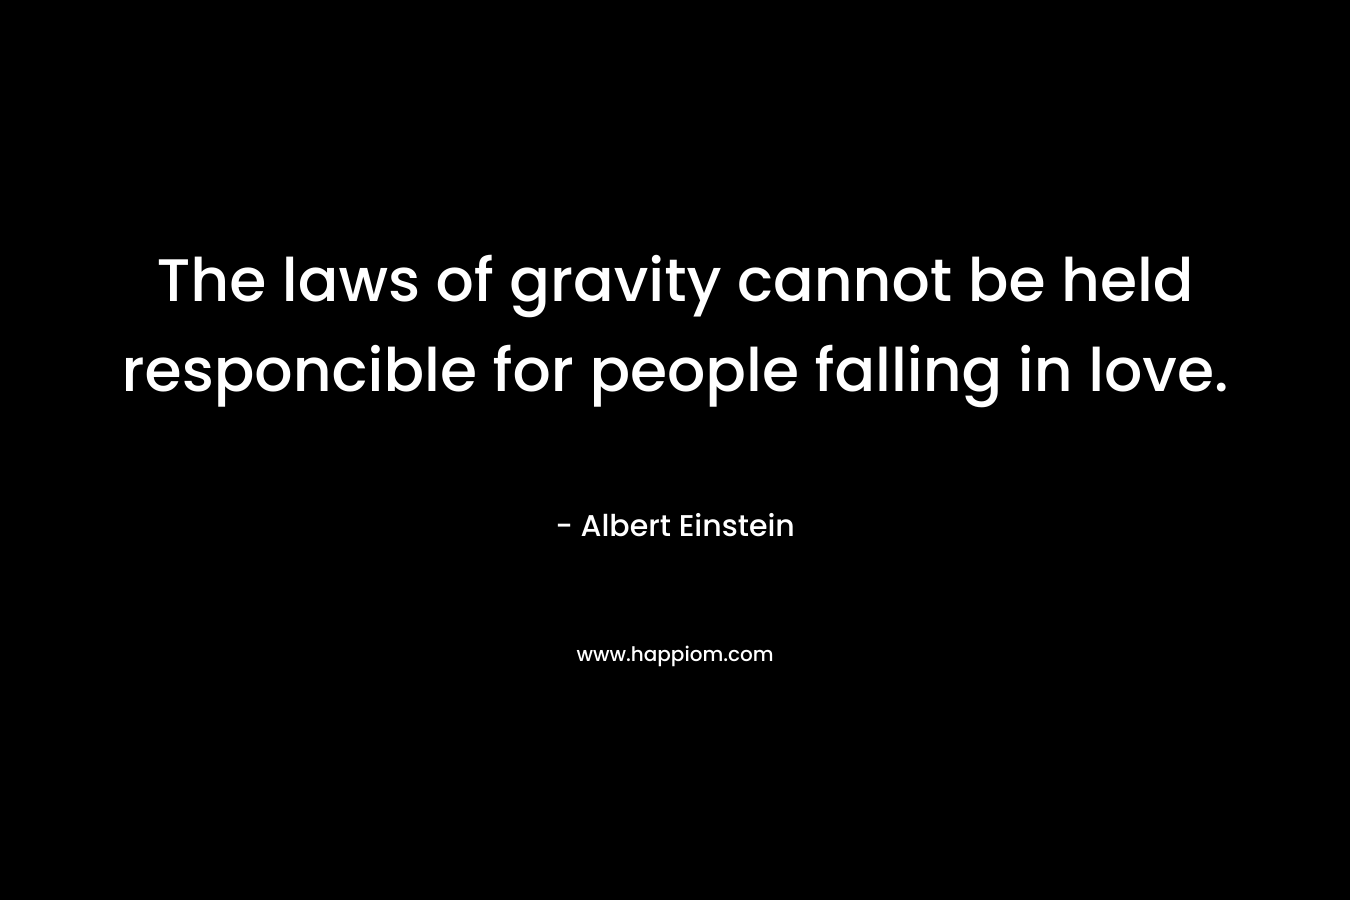 The laws of gravity cannot be held responcible for people falling in love.